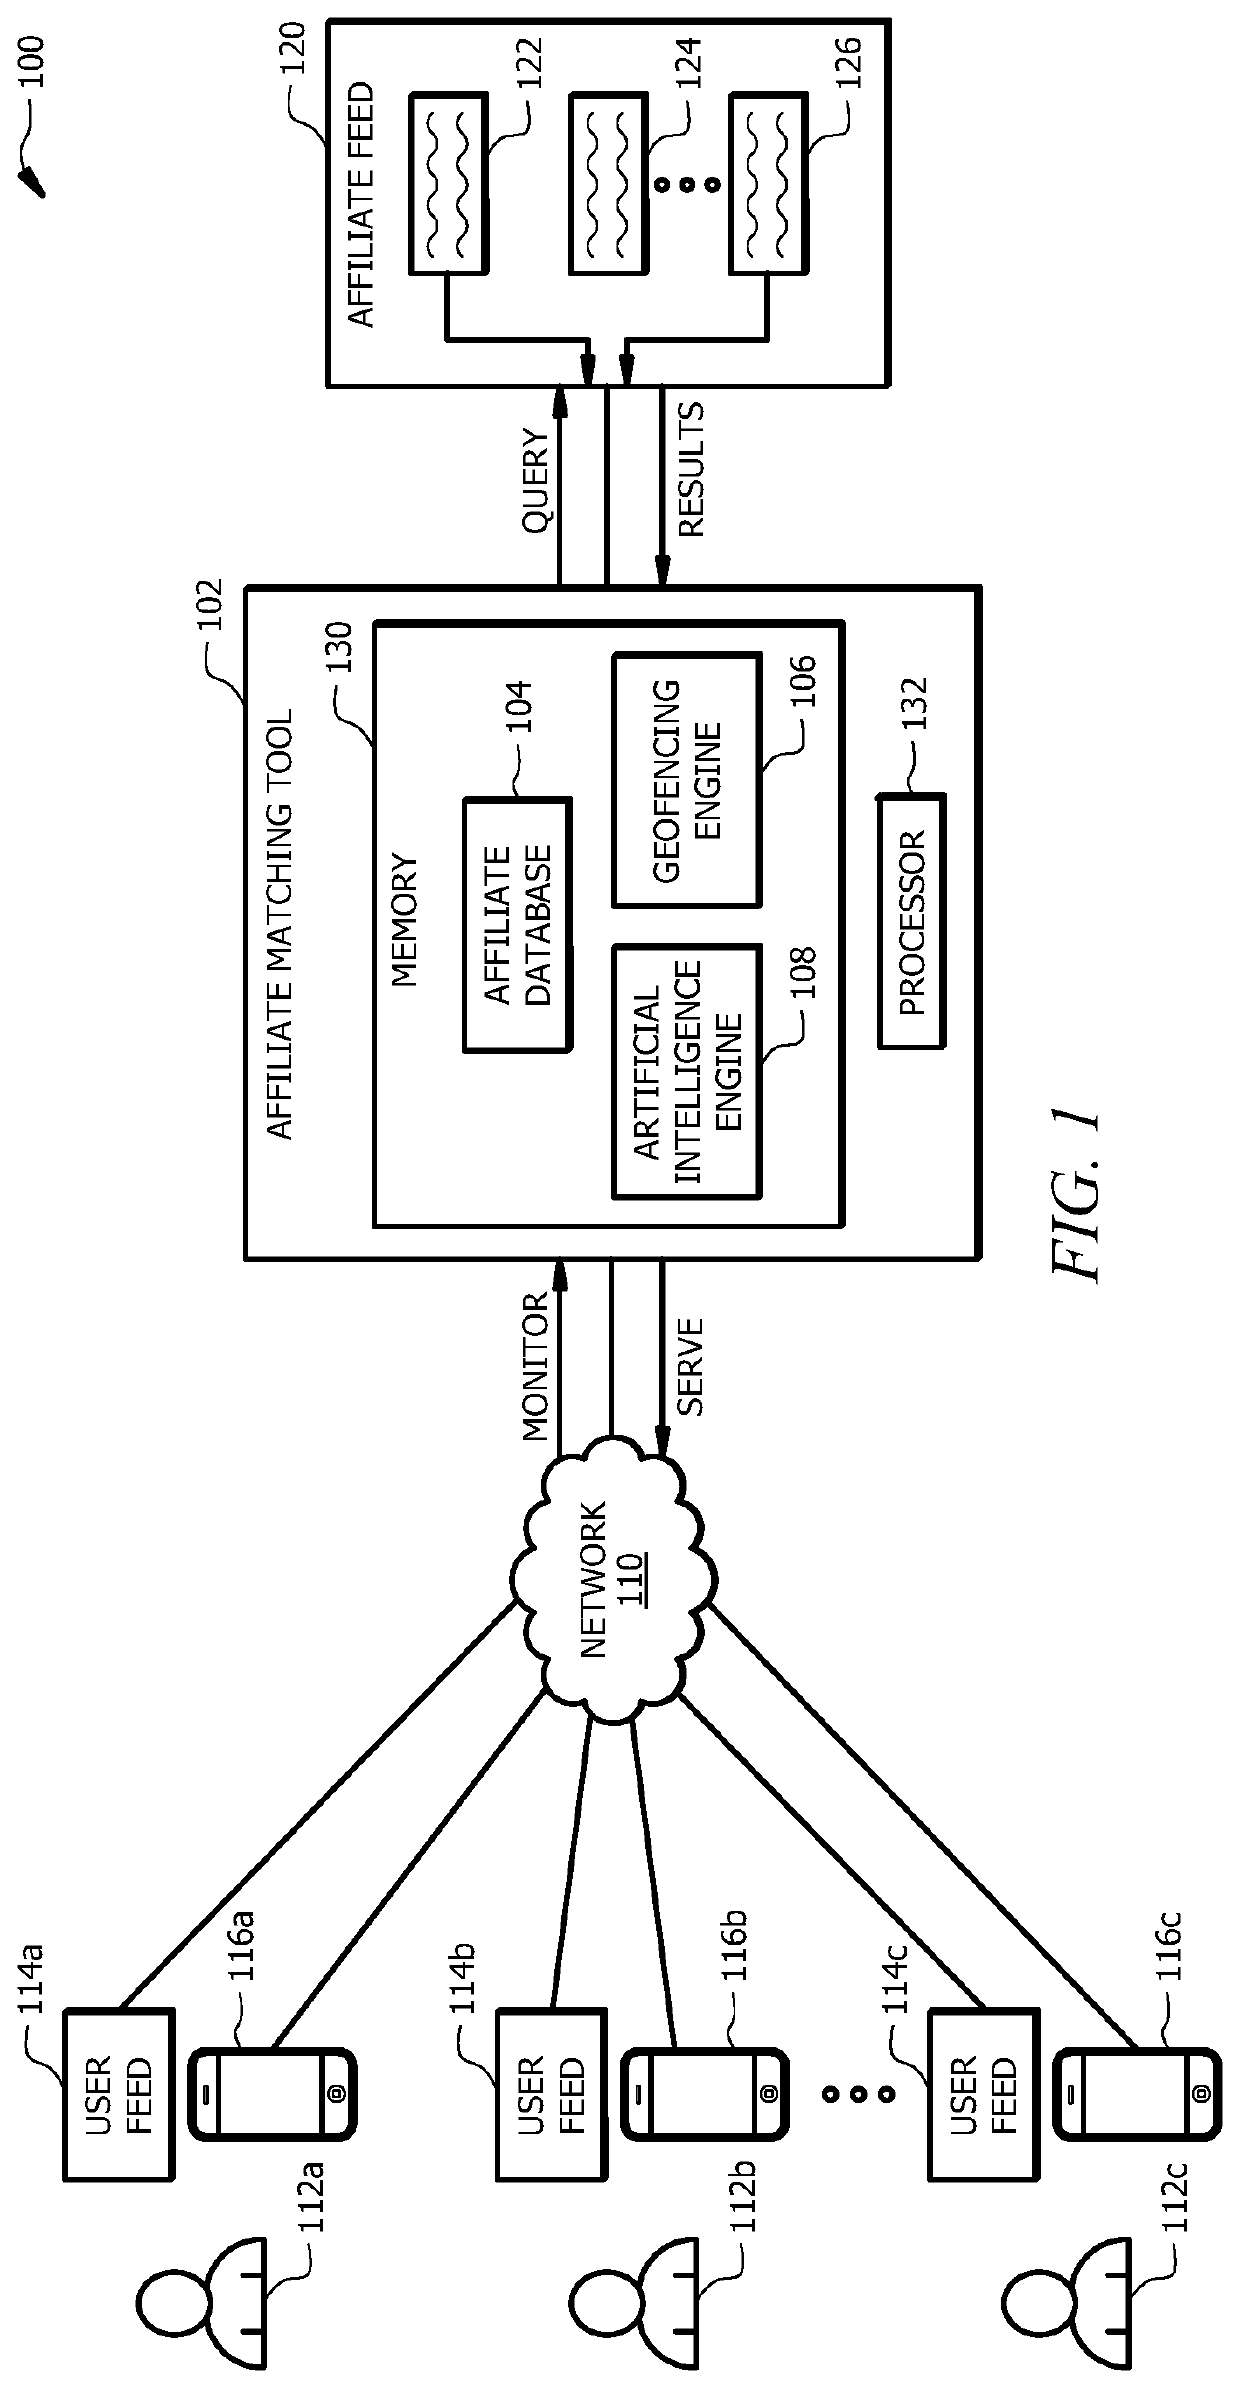 Provisioning services based on geolocation data and activity recognition